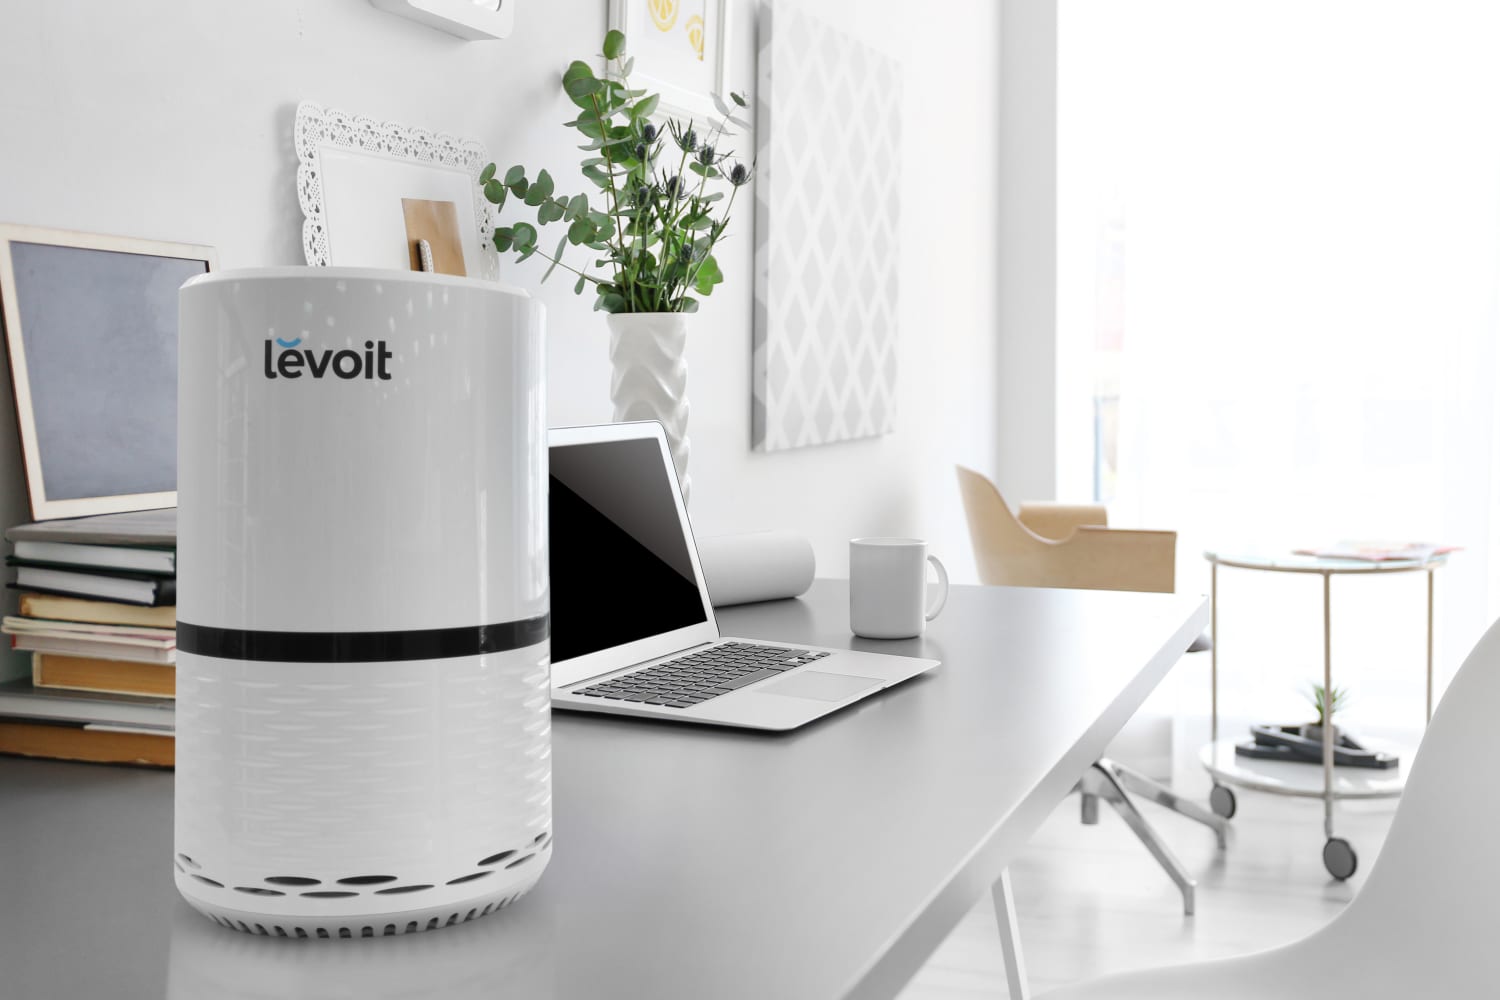 Levoit LV-H132 Review: The Best Budget Air Purifier?